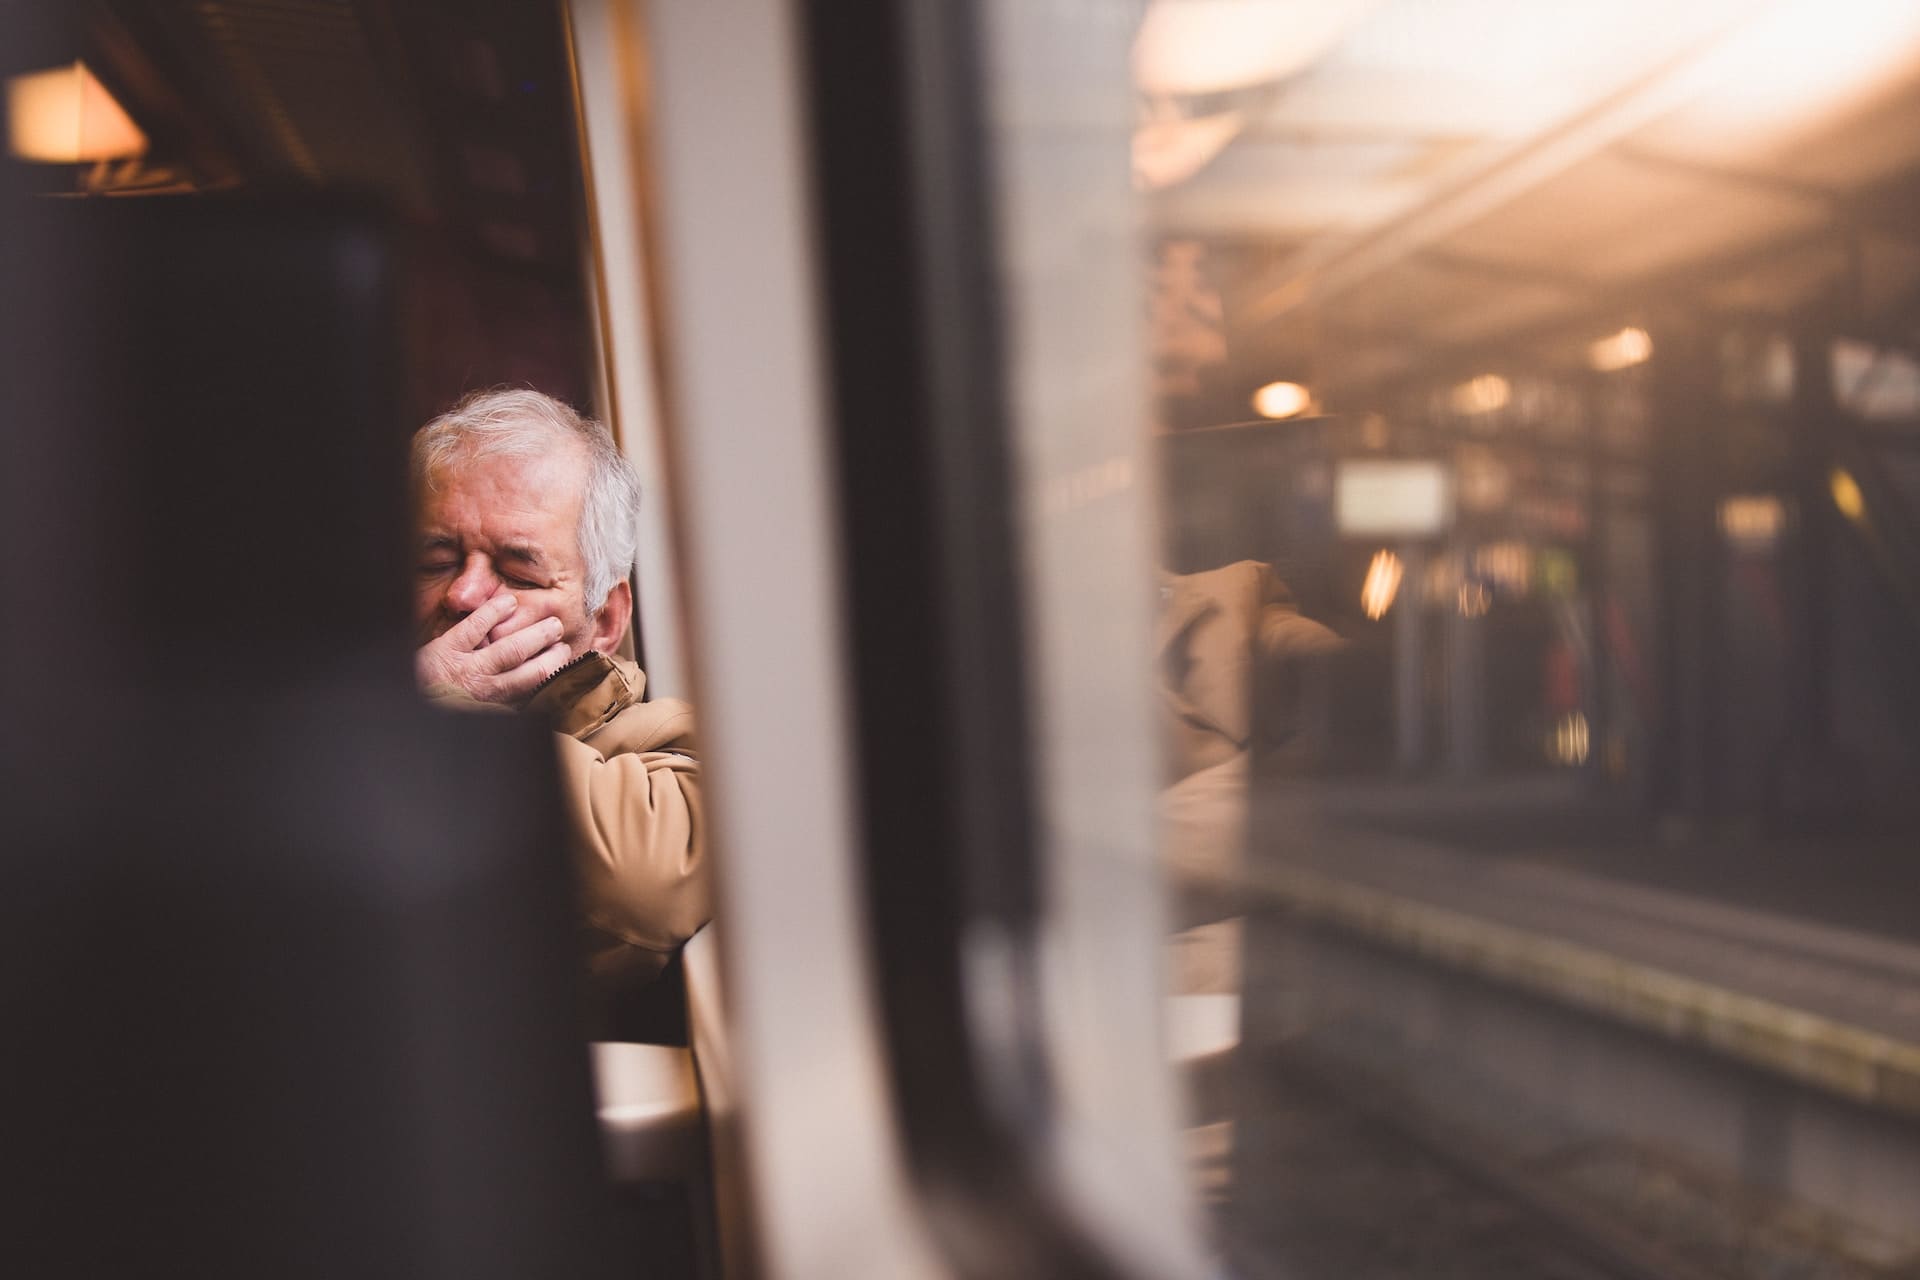 Older man sat on a train struggling with how to deal with fatigue